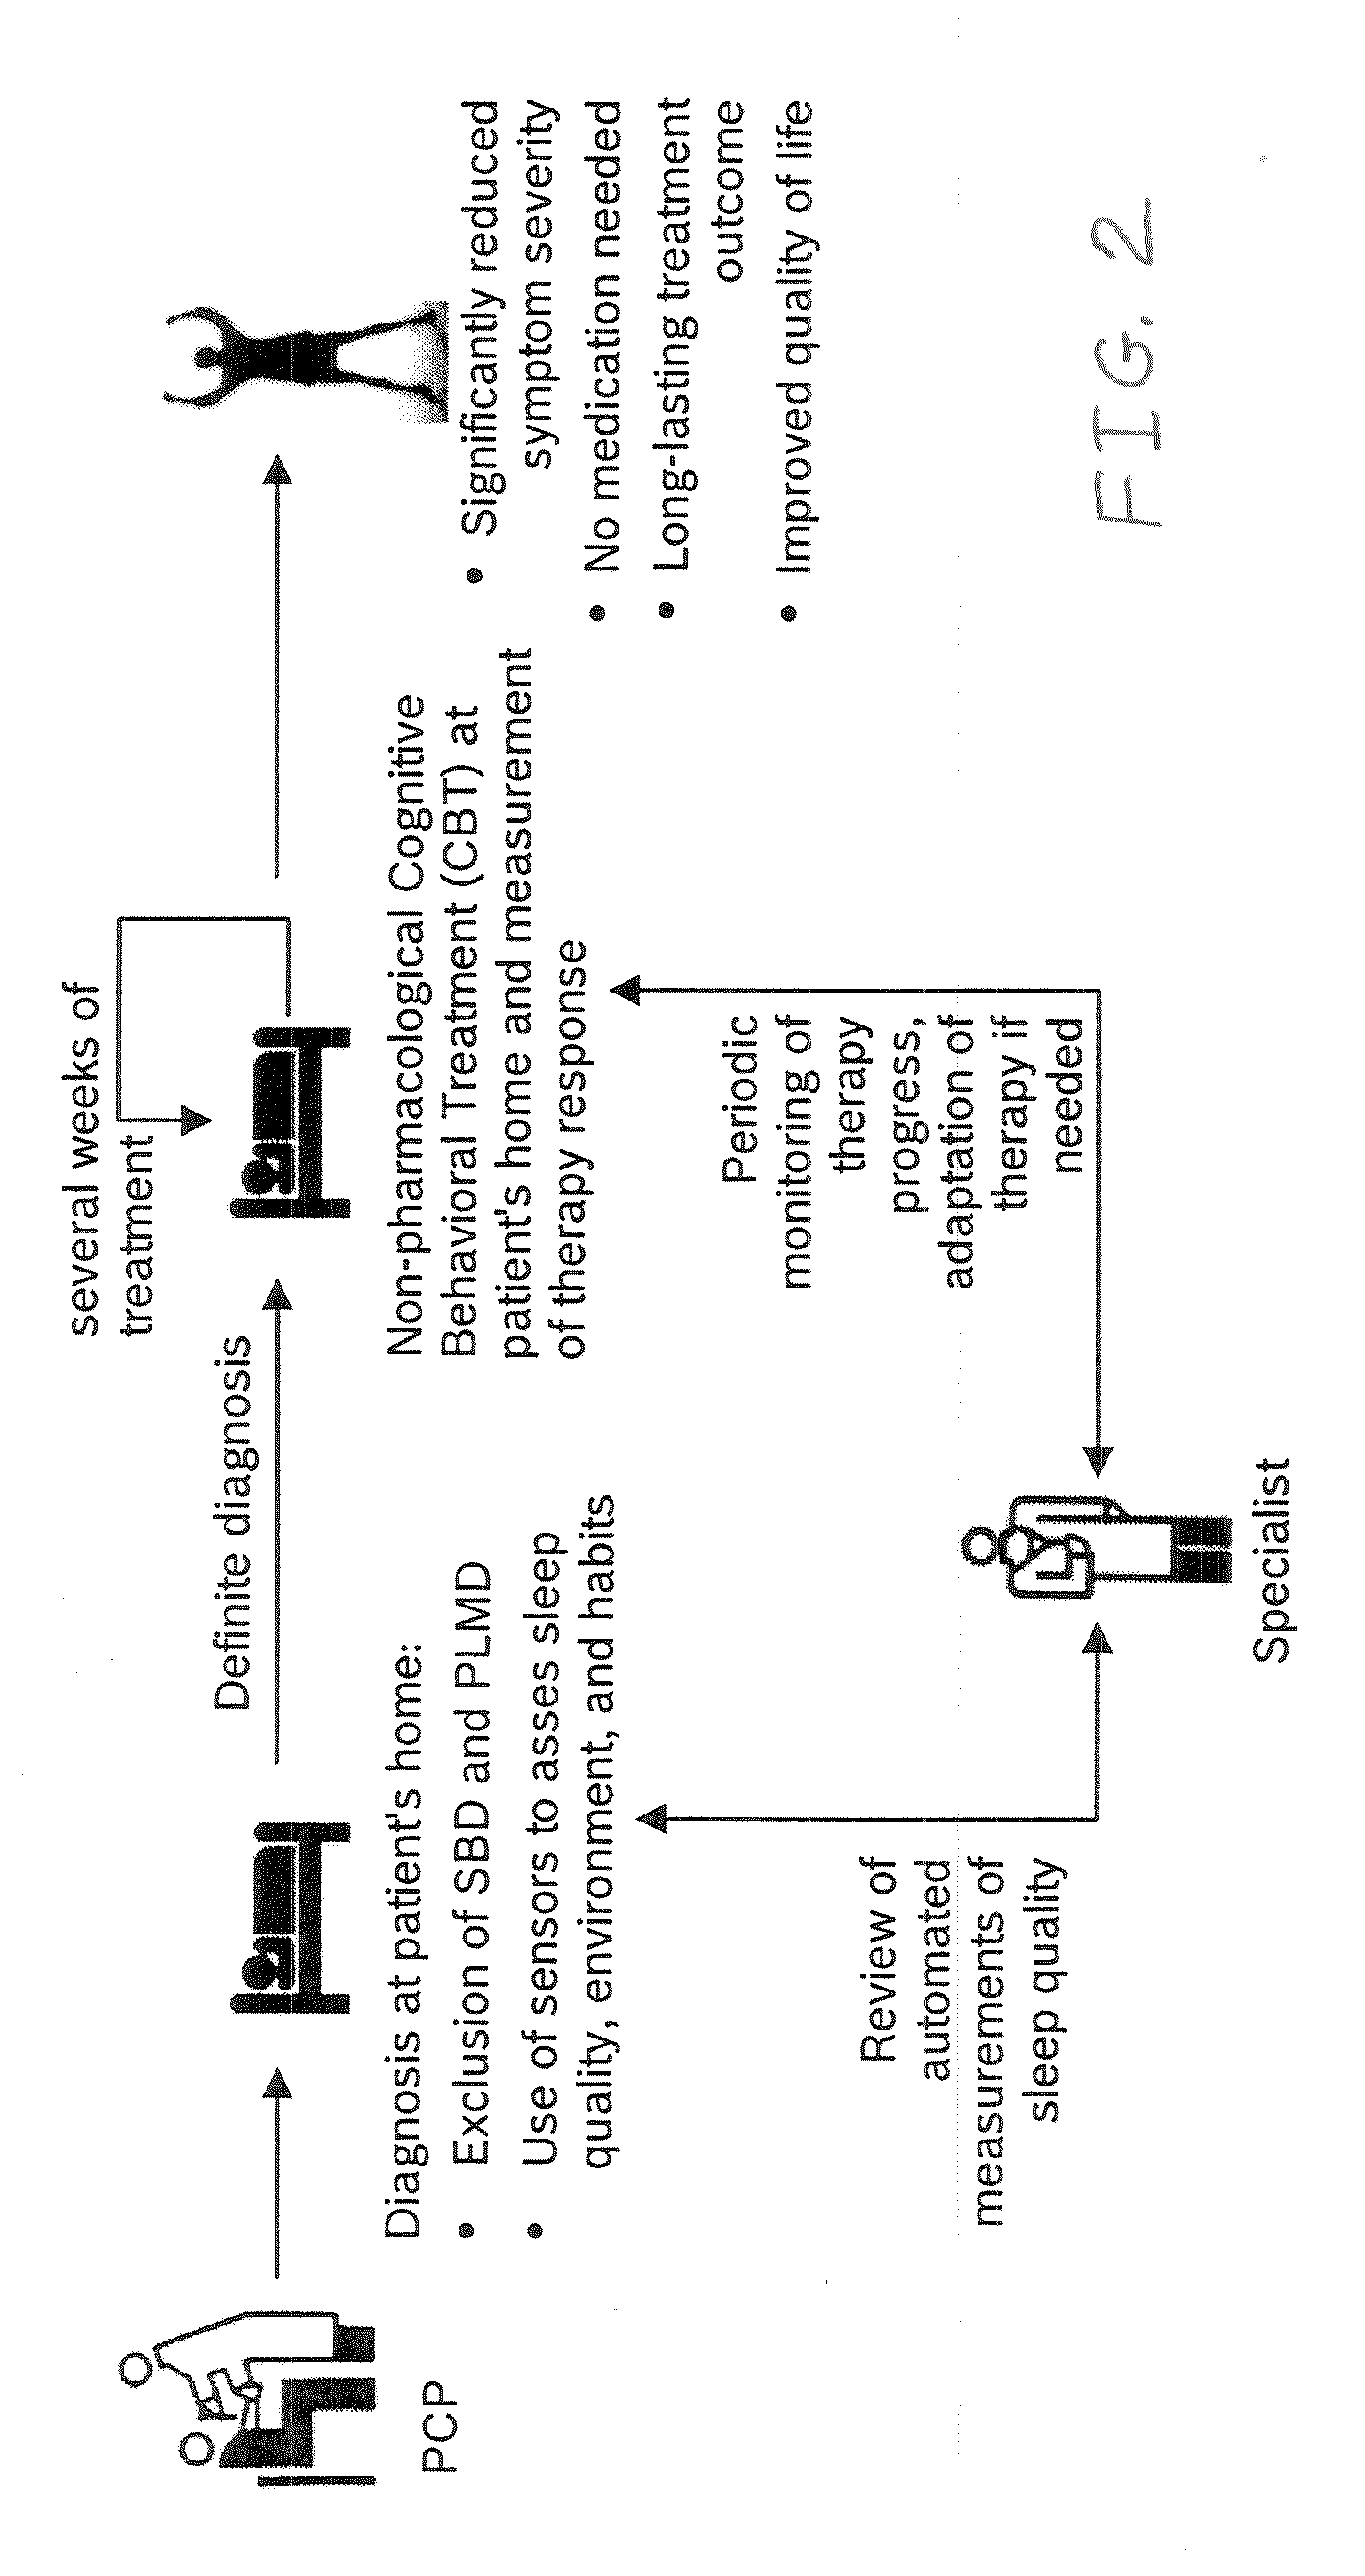 Device and method to monitor, assess and improve quality of sleep